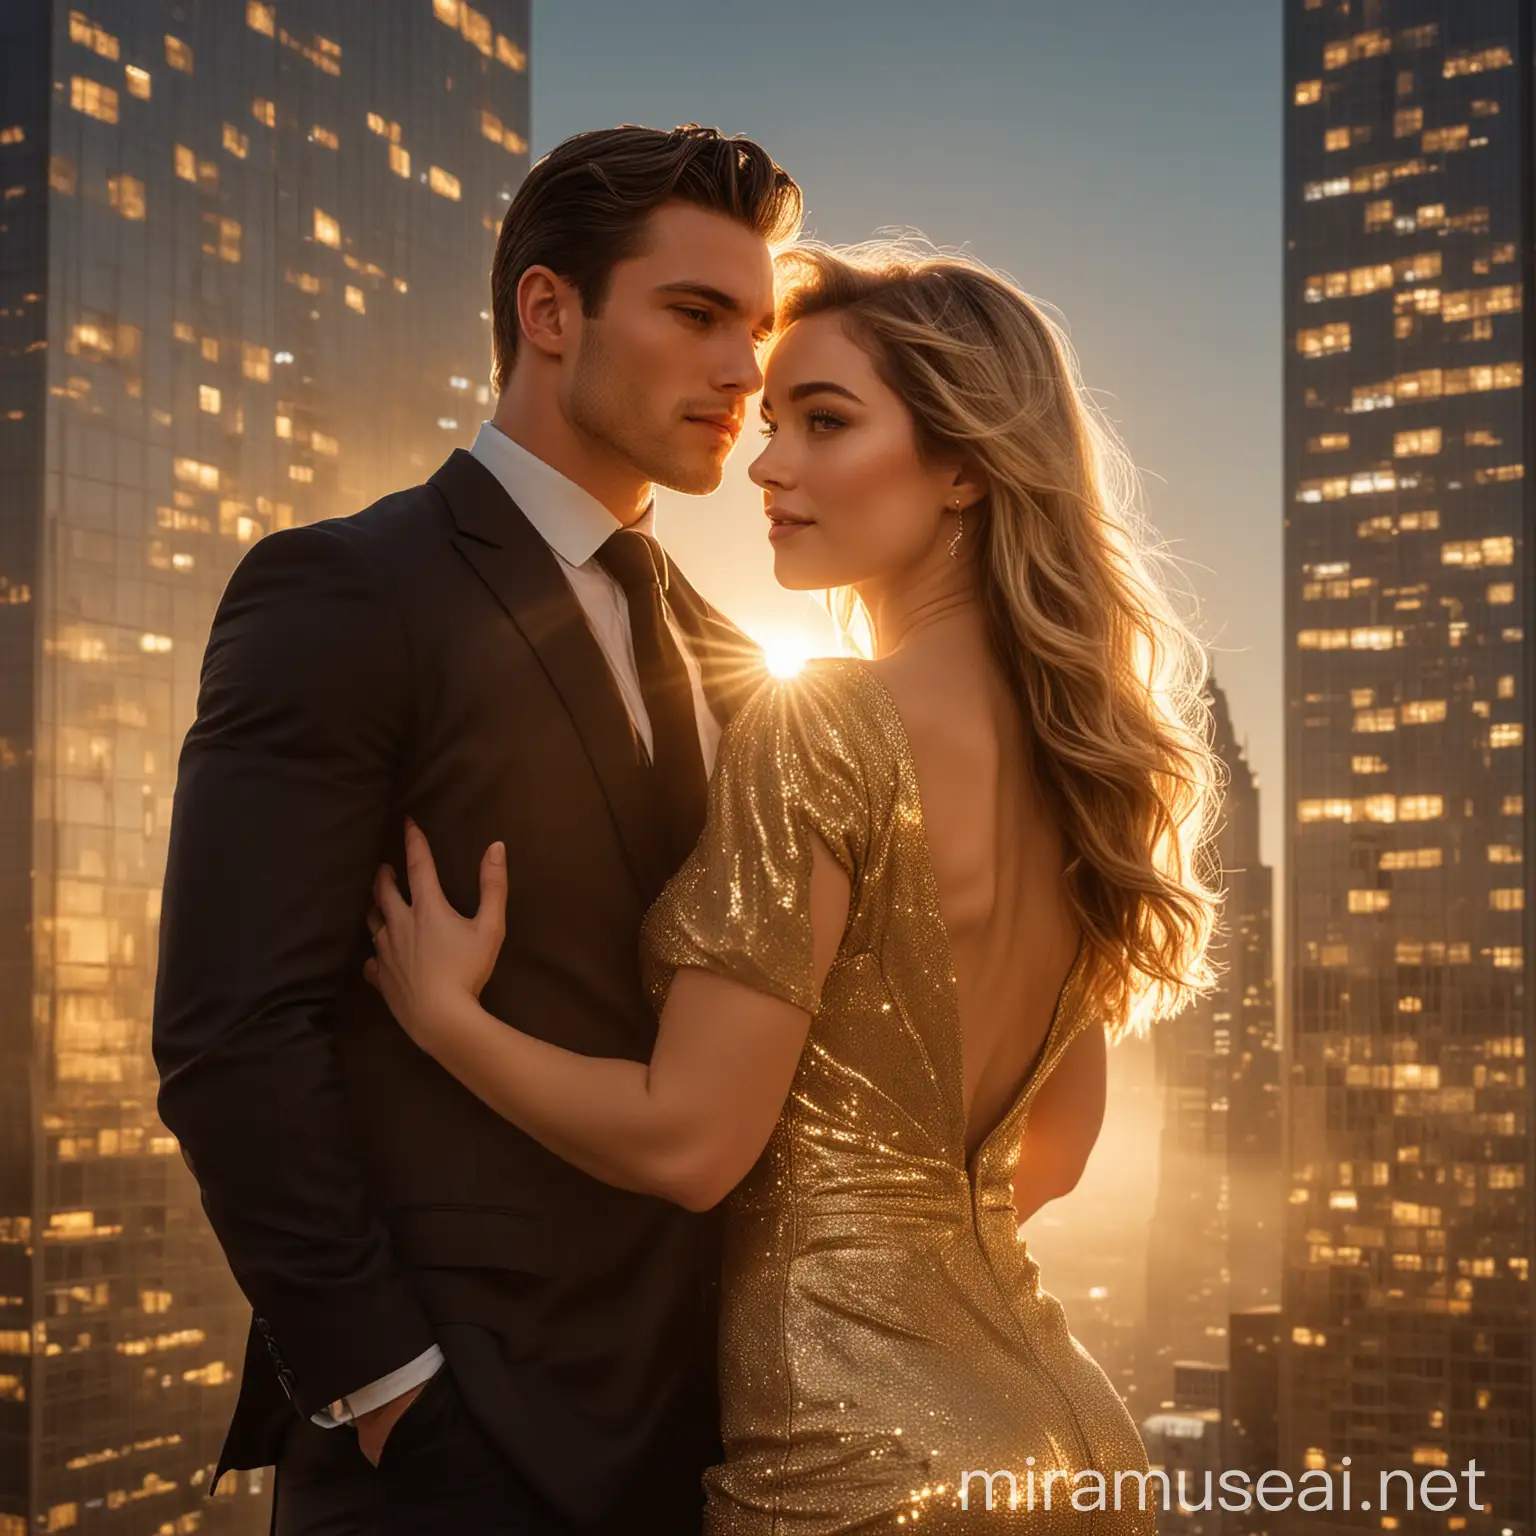 A beautiful lady in a dress, held by a handsome light muscular man in suit standing in her back, with a golden luminous light glowing behind them in front of a skyscraper.